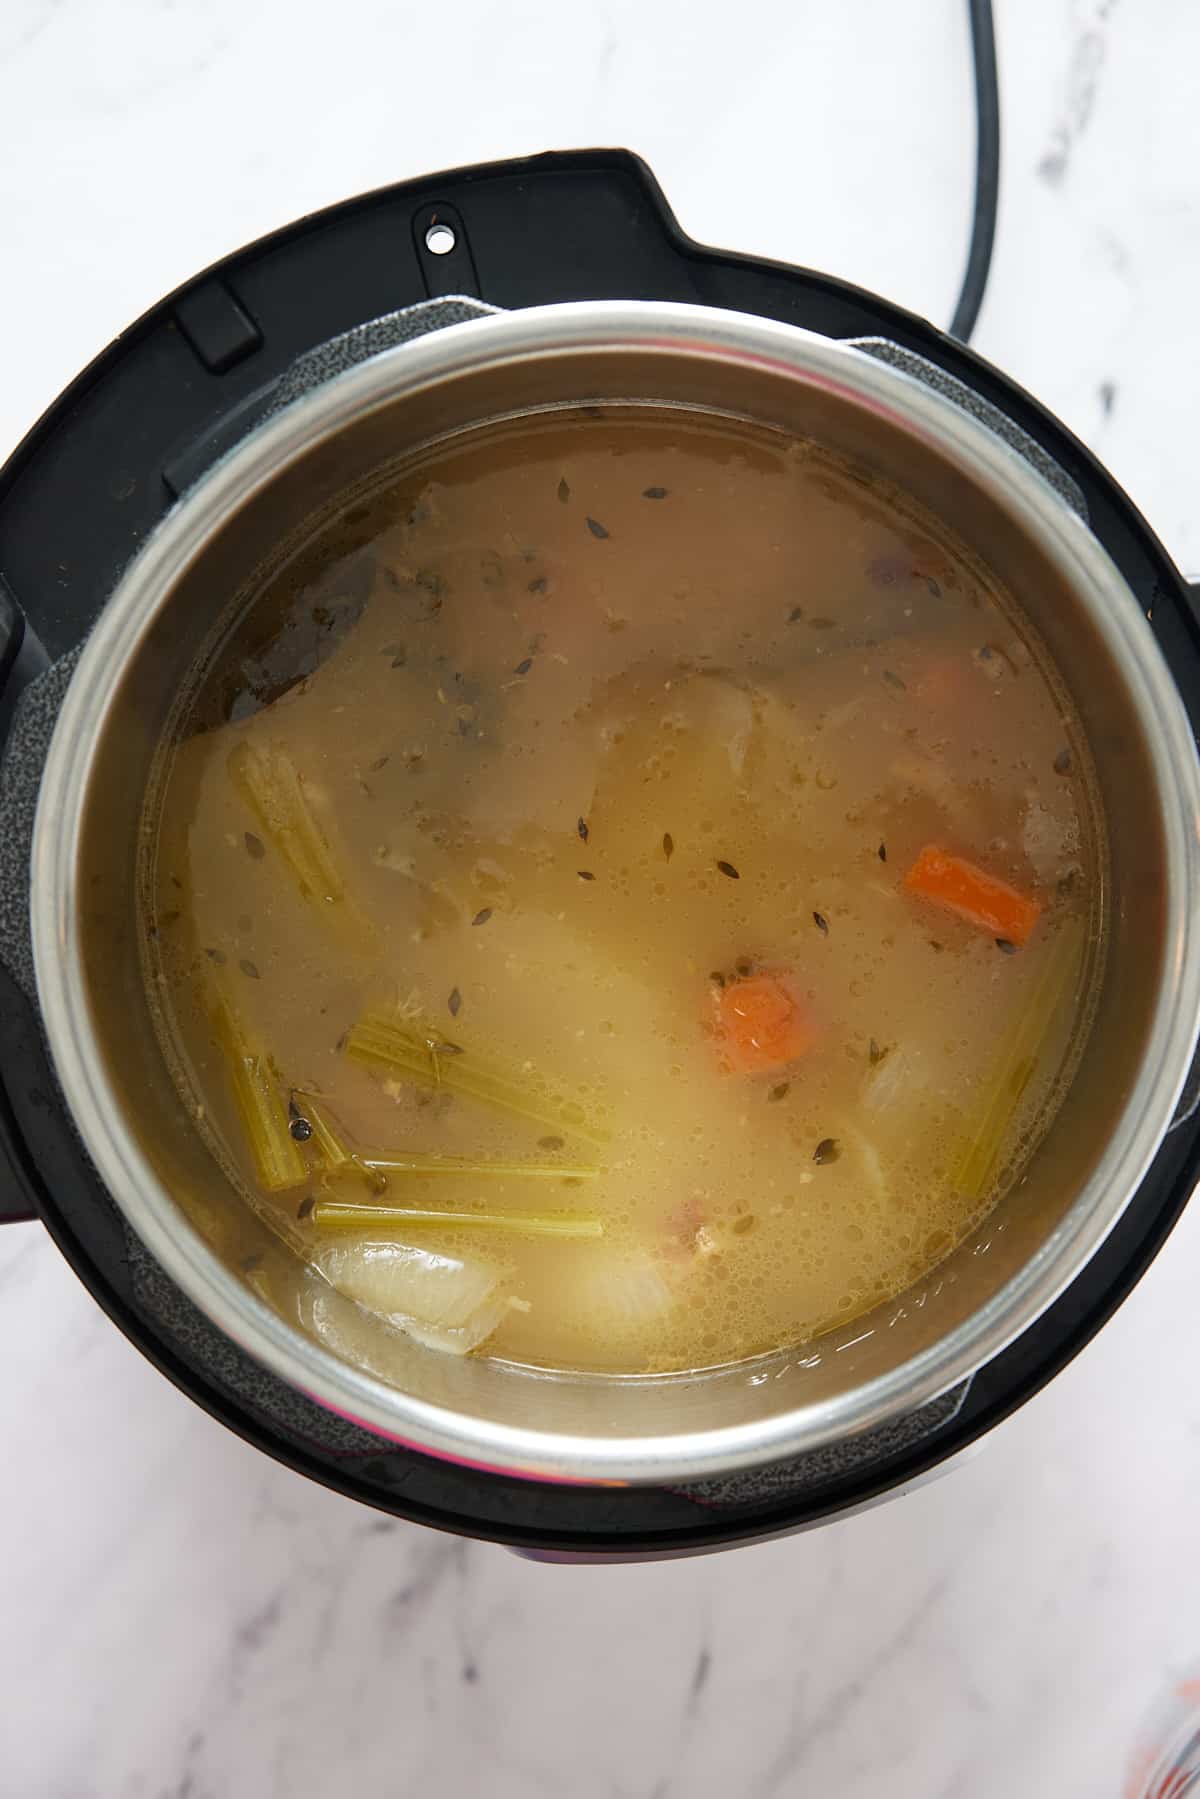 Pressure cooker pot containing cooked turkey broth